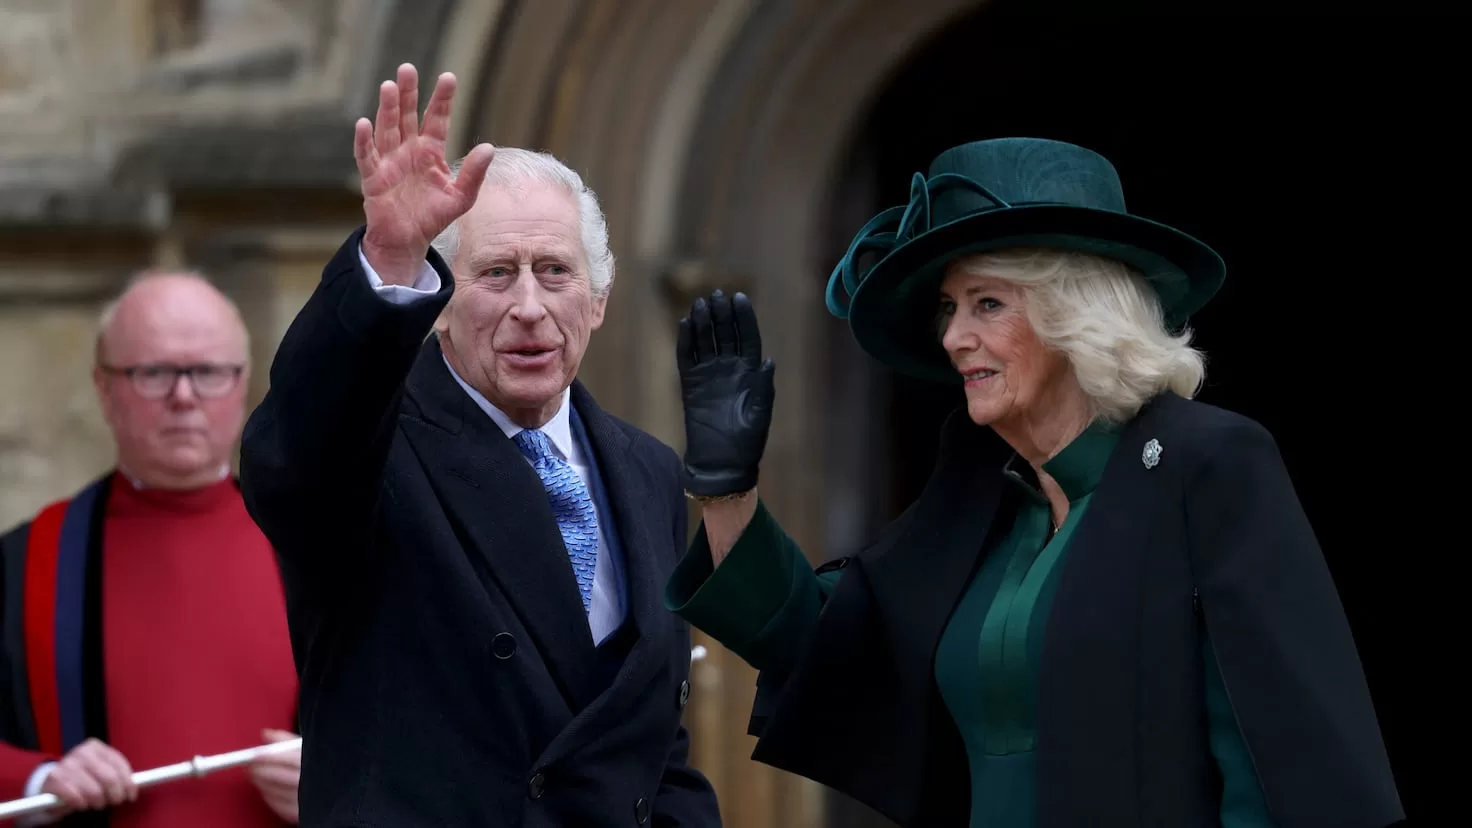 King Charles reappears in public for the first time since announcing that he has cancer
